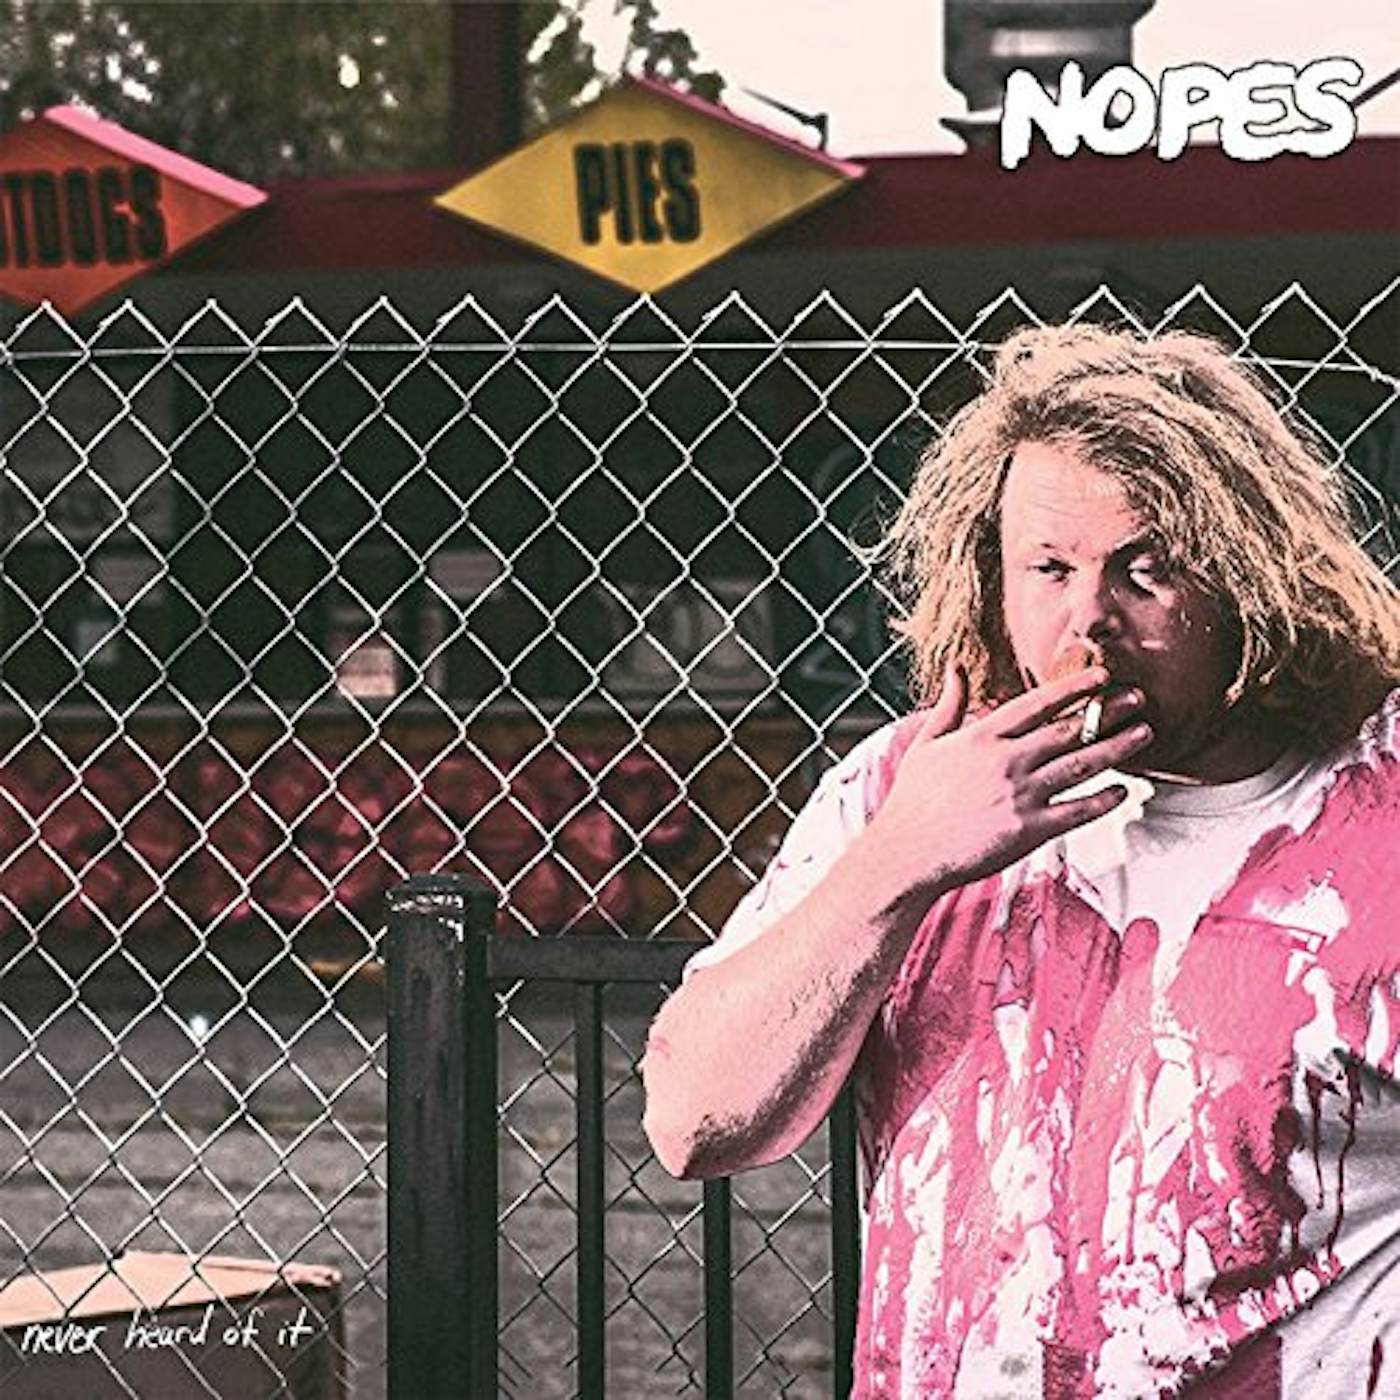 Nopes NEVER HEARD OF IT CD